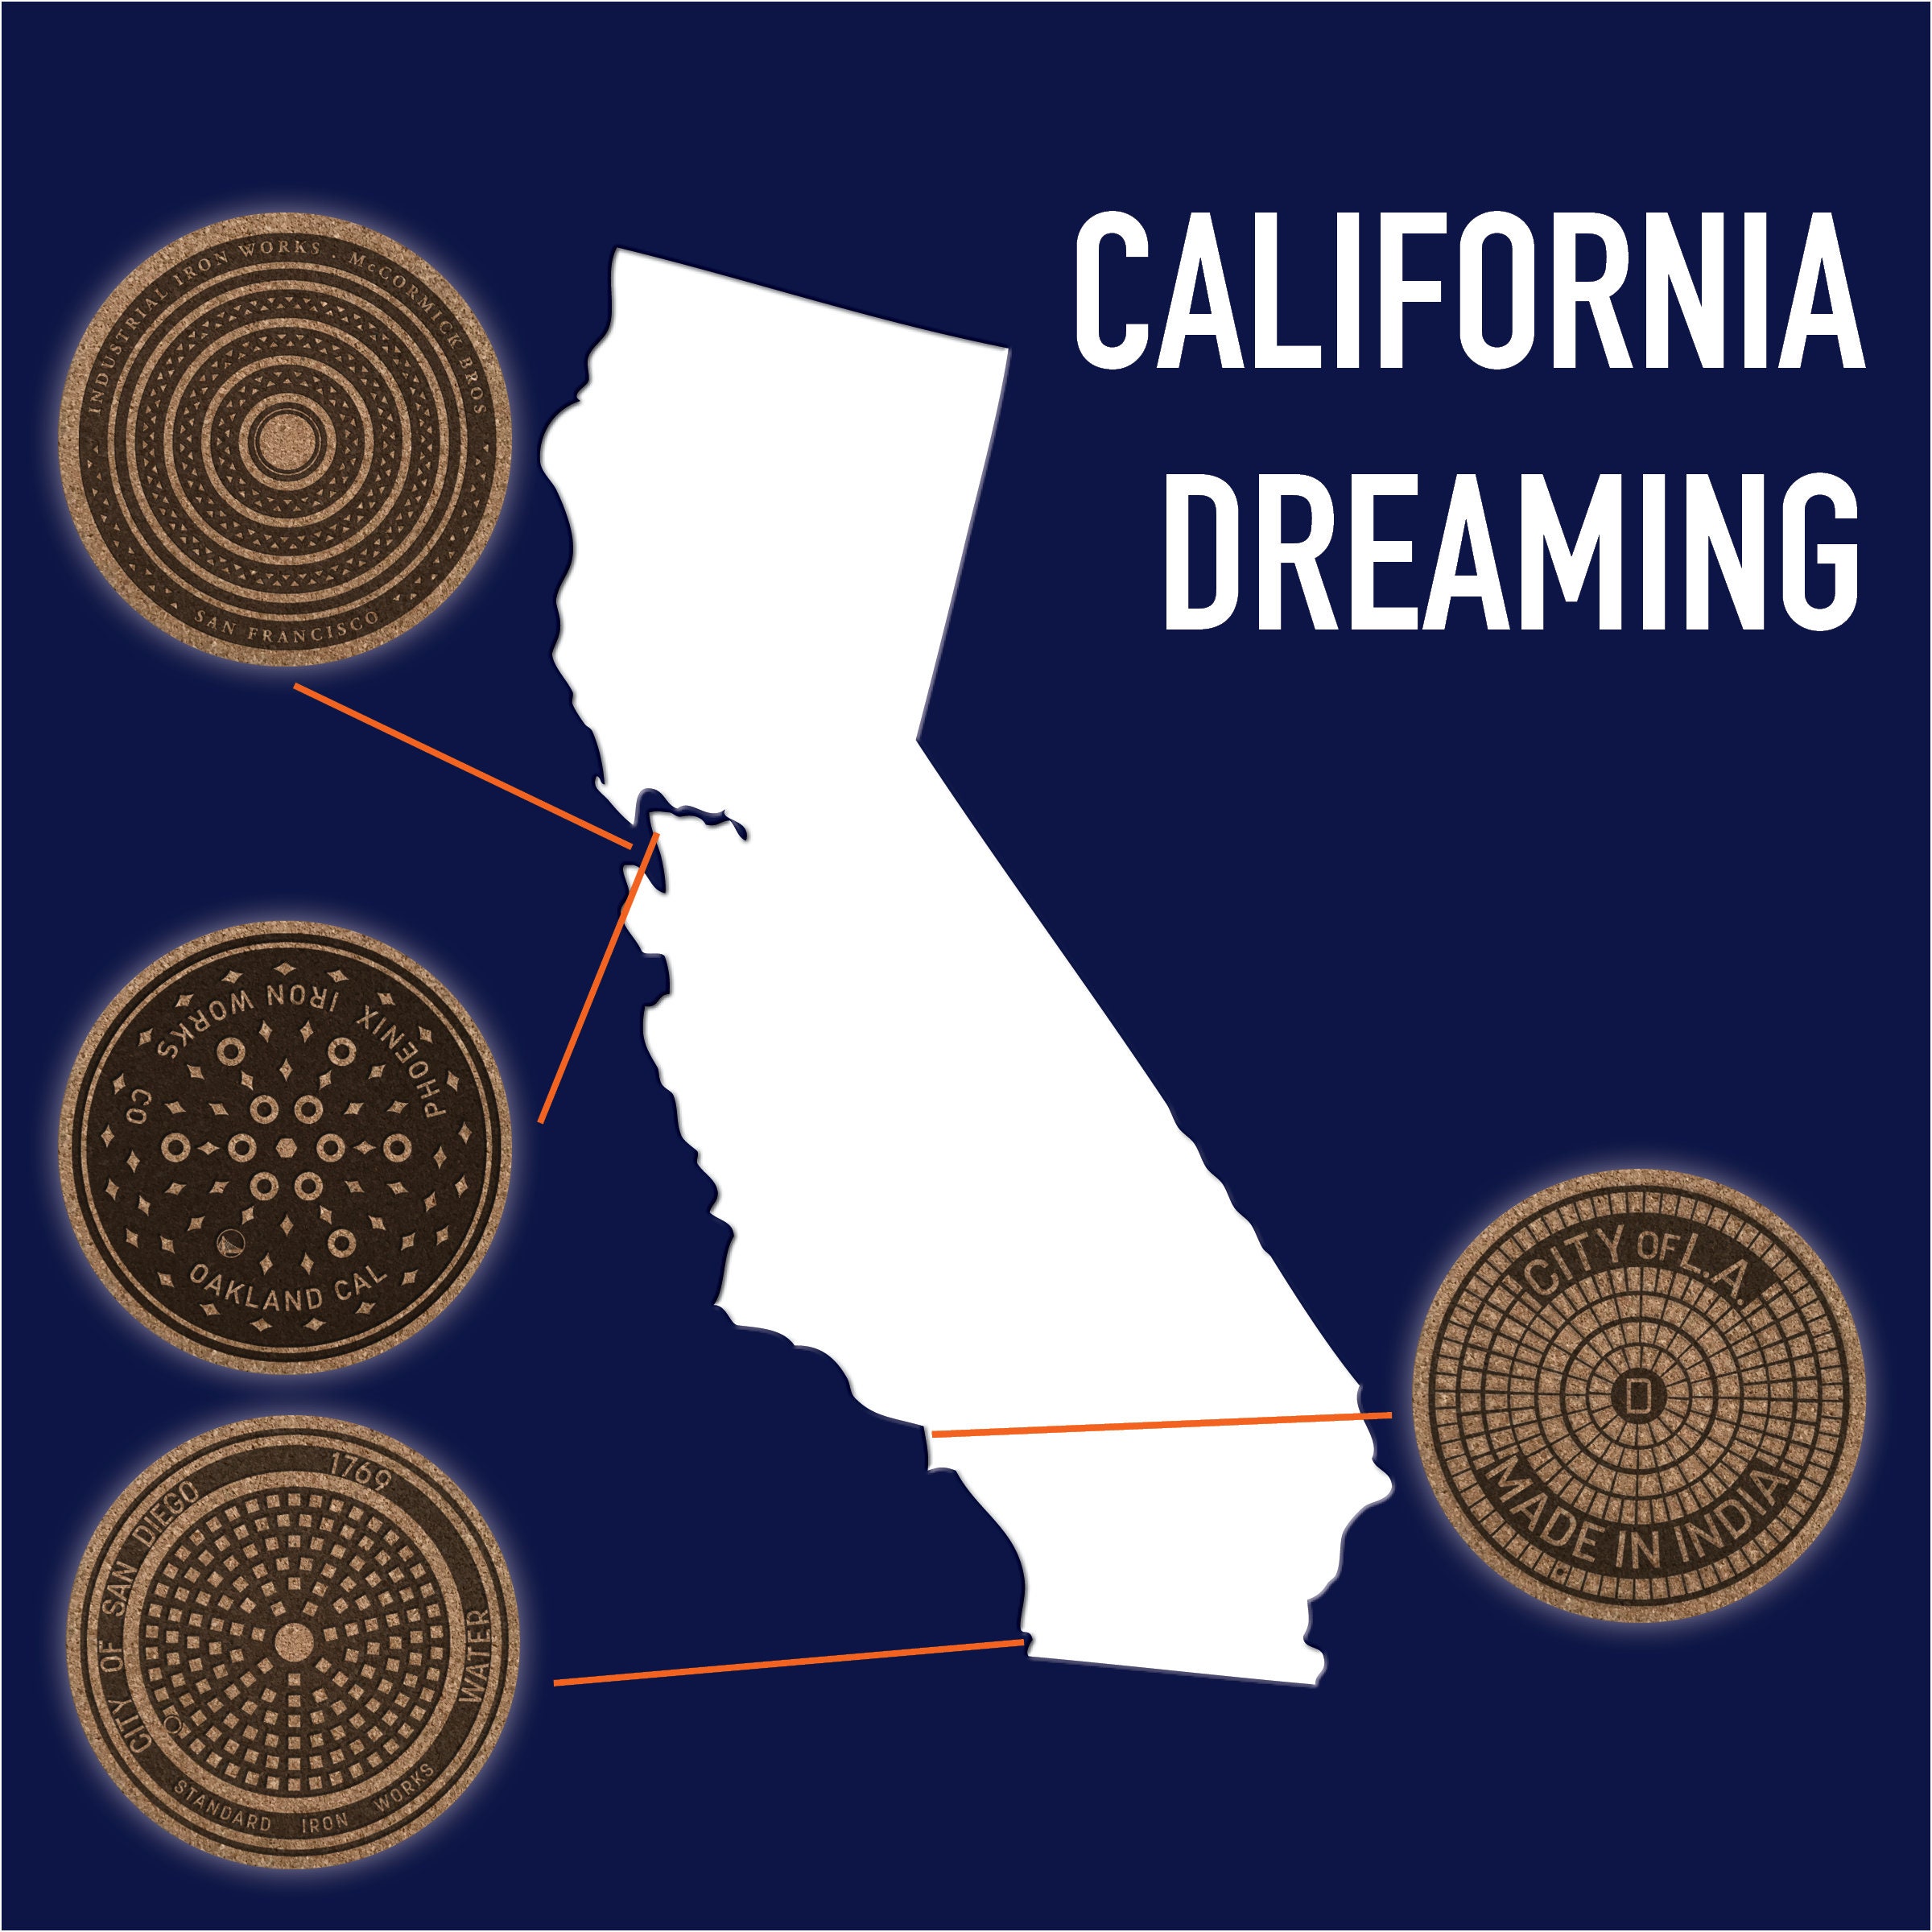 California Dreaming - From Los Angeles to San Francisco